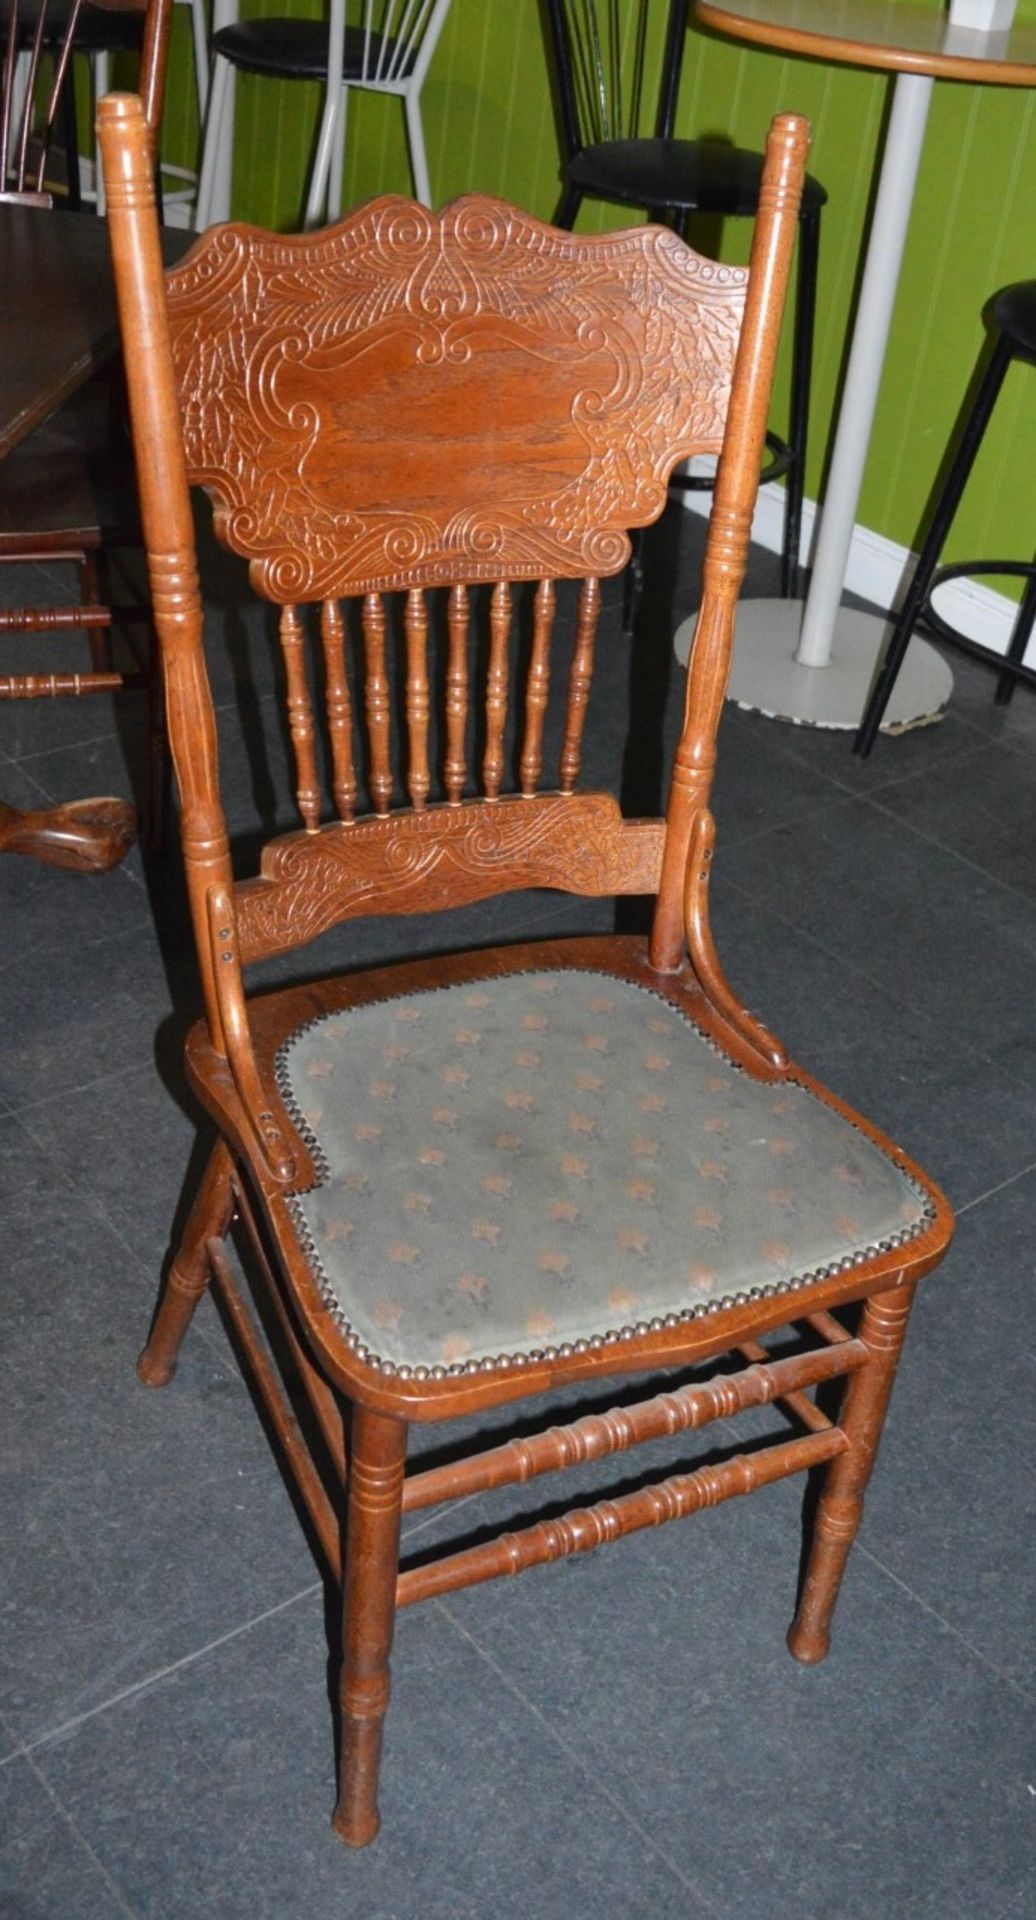 23 x Dining Chairs With Etched Spindle Backs and Fabrc Seat Pads - Ref BB000 - CL351 - Location: - Image 8 of 9